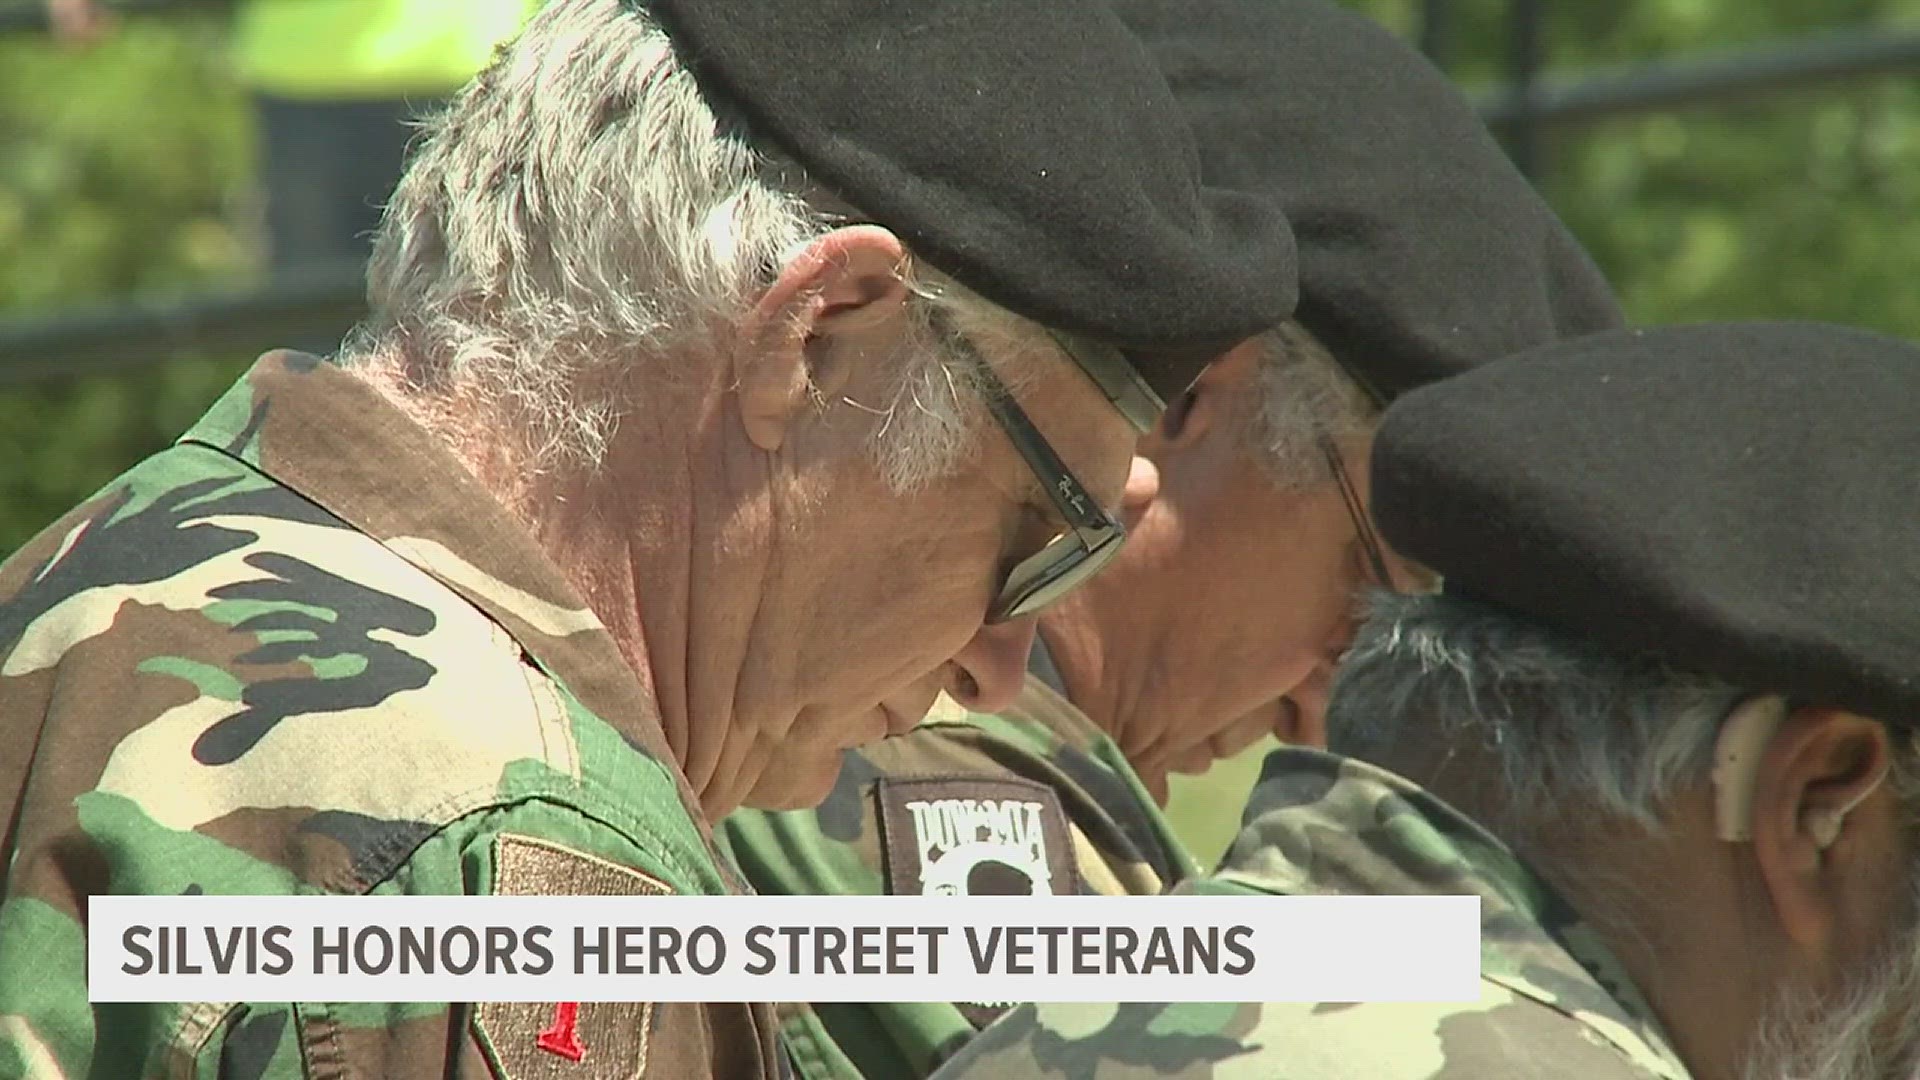 The street is known for its 8 latino residents who served in World War II and the Korean War.